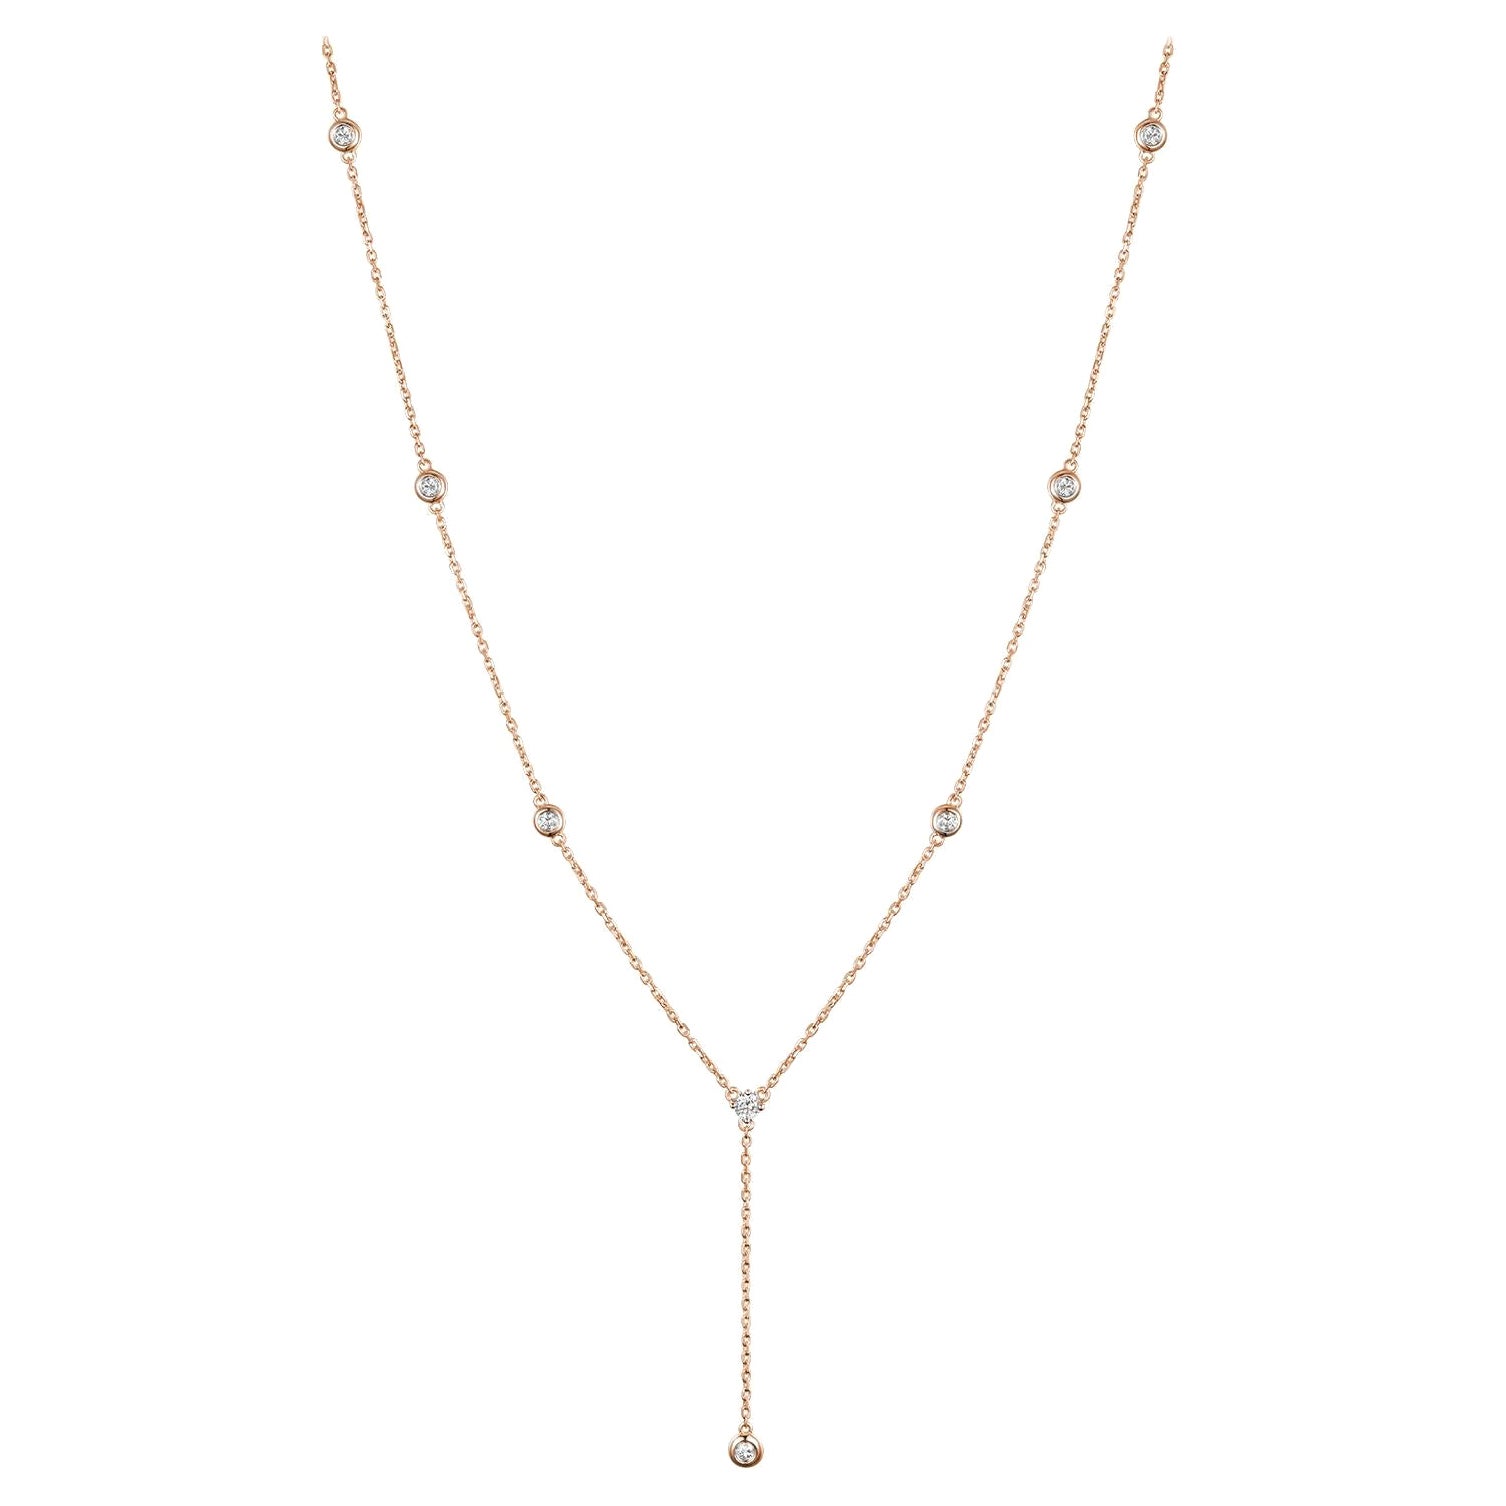 8-Station Diamond by the Yard Necklace in 14 Karat Rose Gold